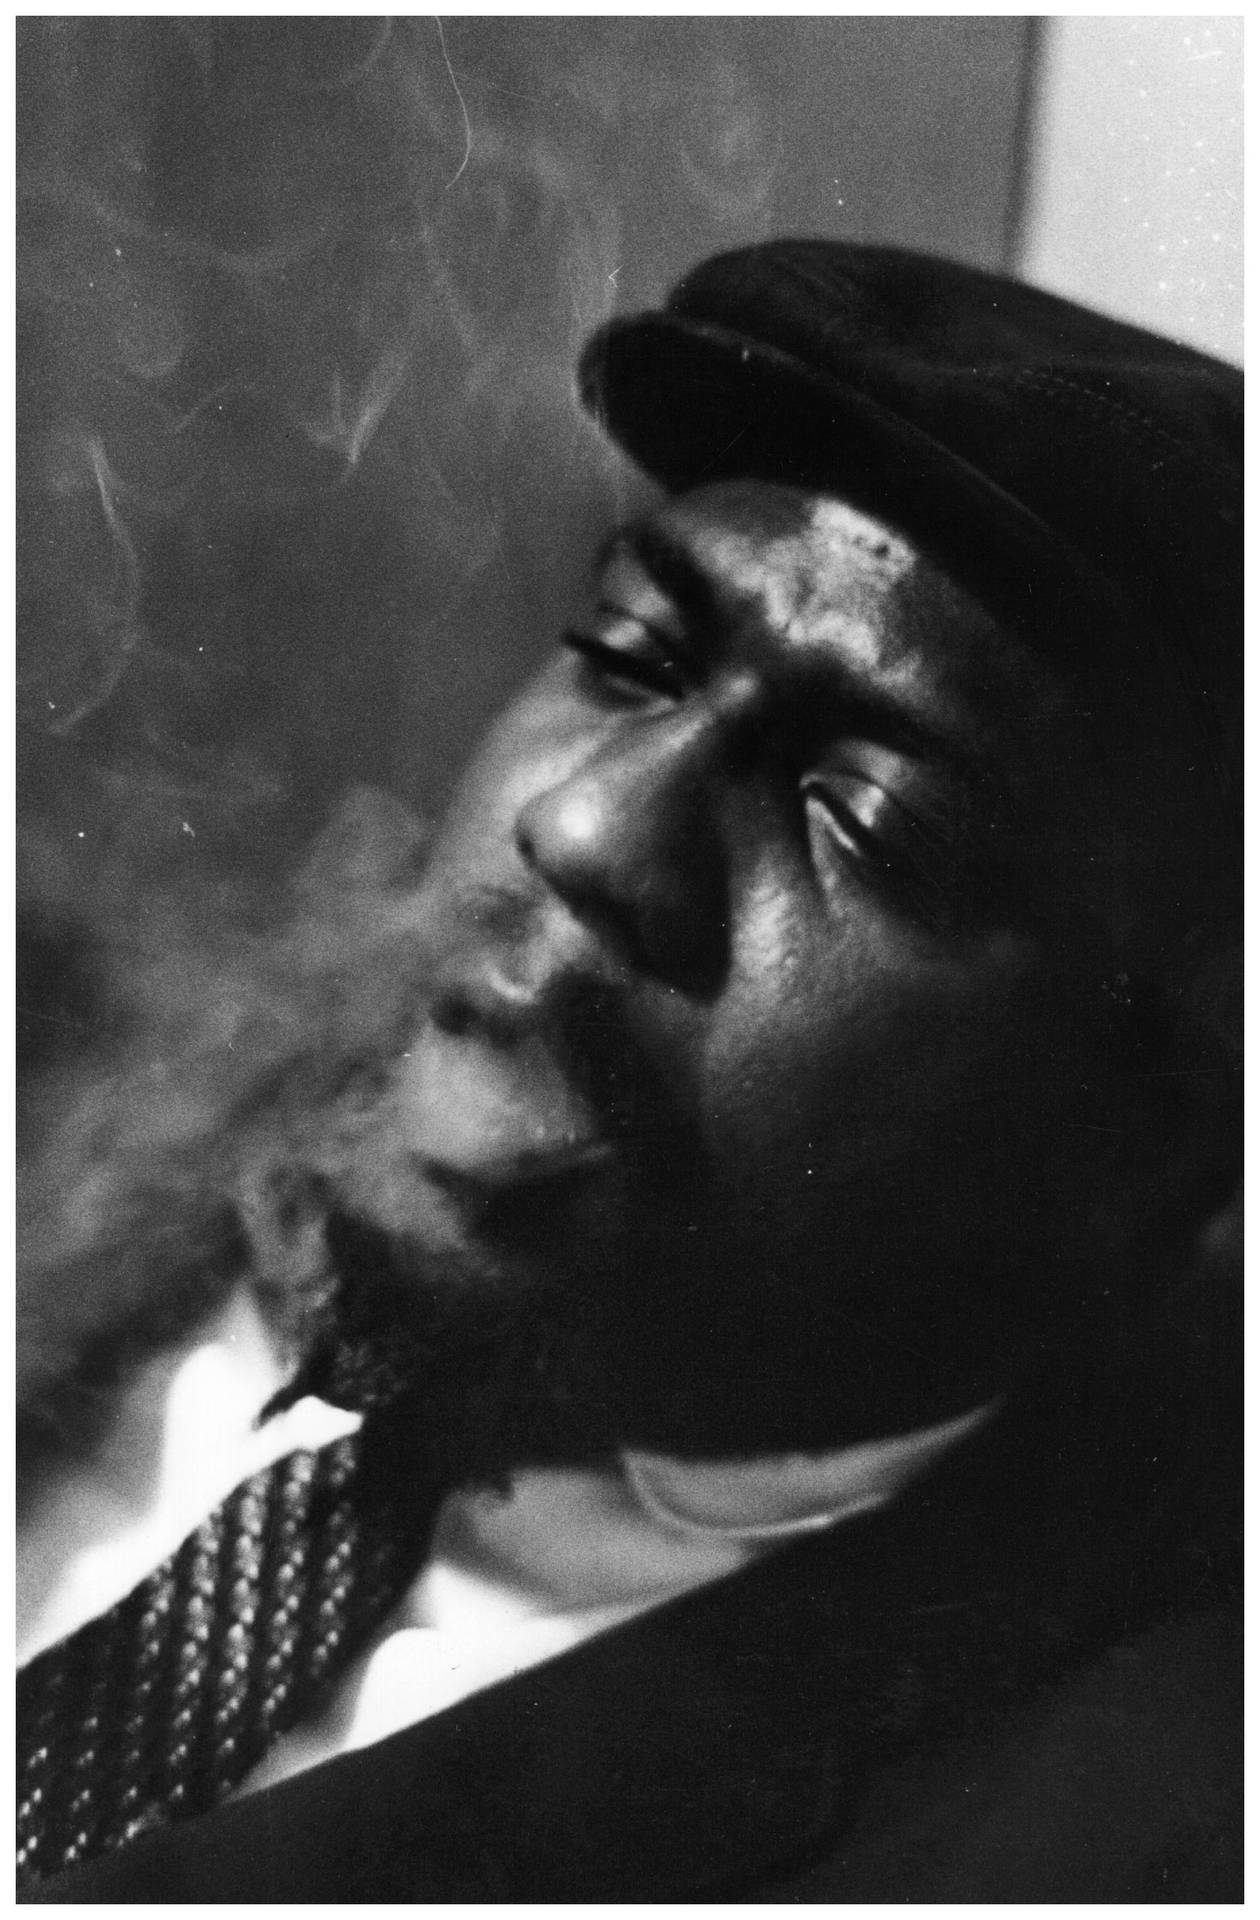 Theloniousmonk Rökning Ut - This Can Be Used As A Title For A Wallpaper Featuring A Picture Of Thelonious Monk Smoking. Wallpaper